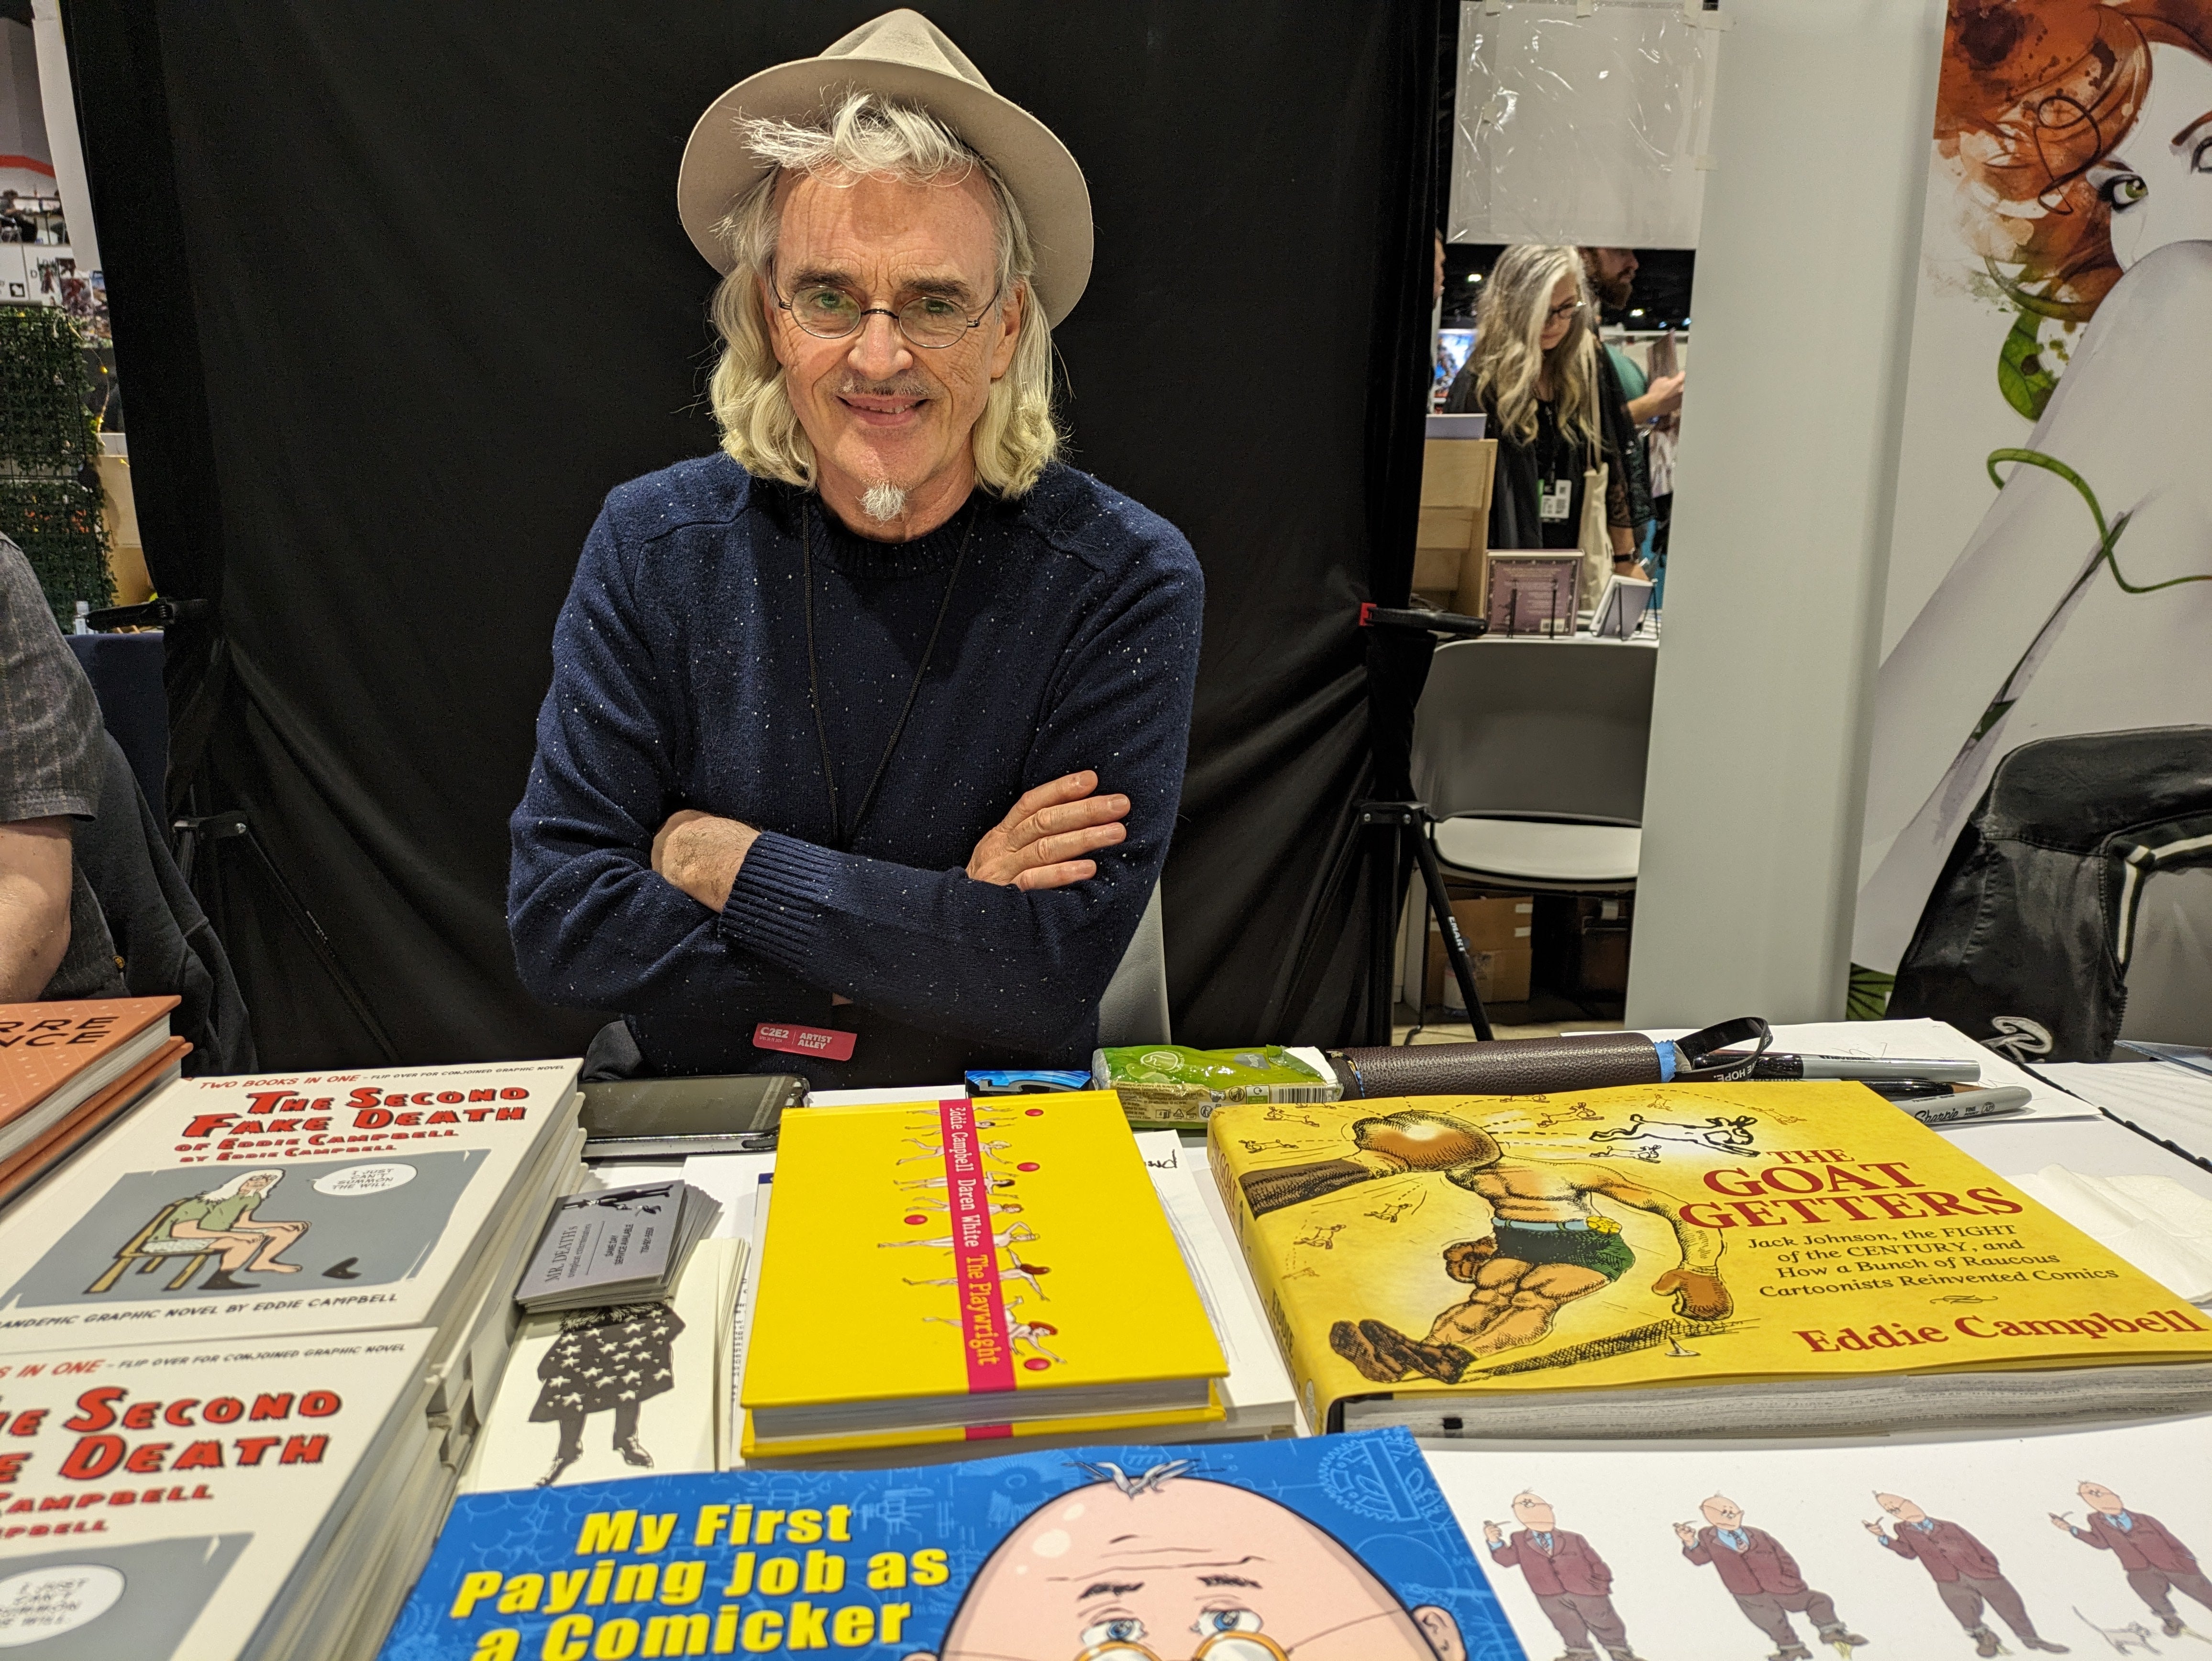 Photograph of Eddie Campbell at his convention booth